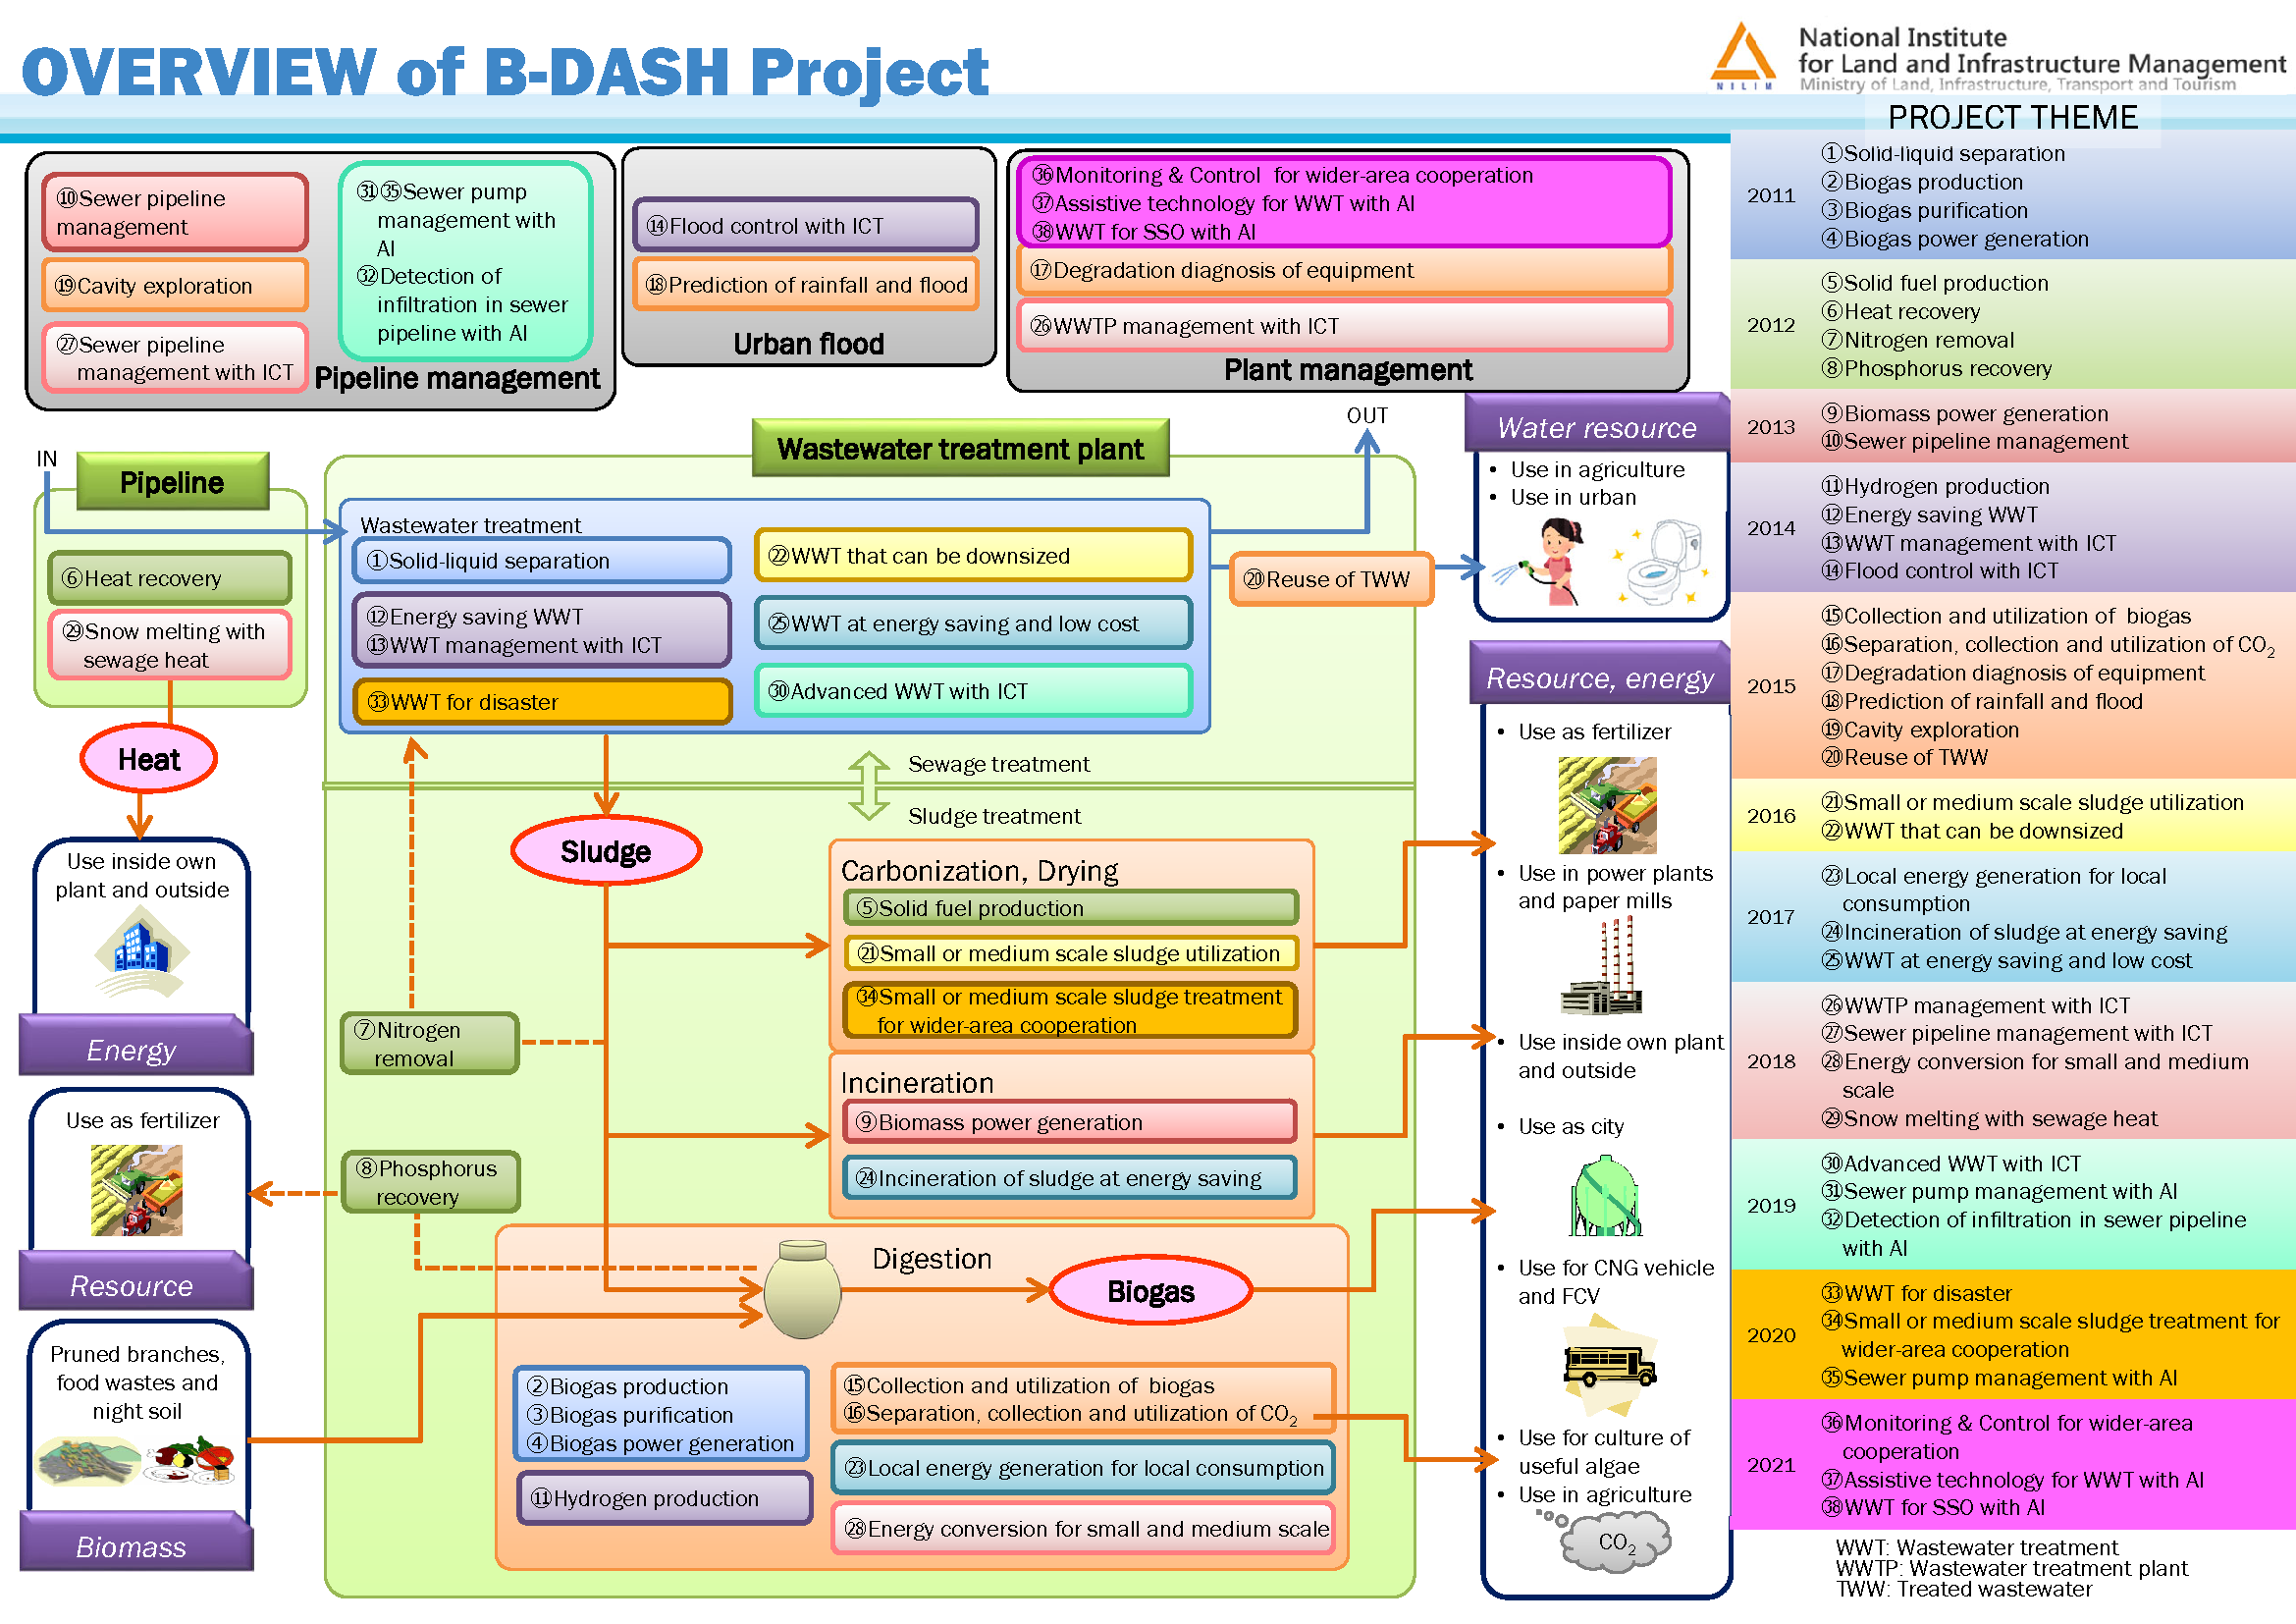 Overview of B-DASH Project